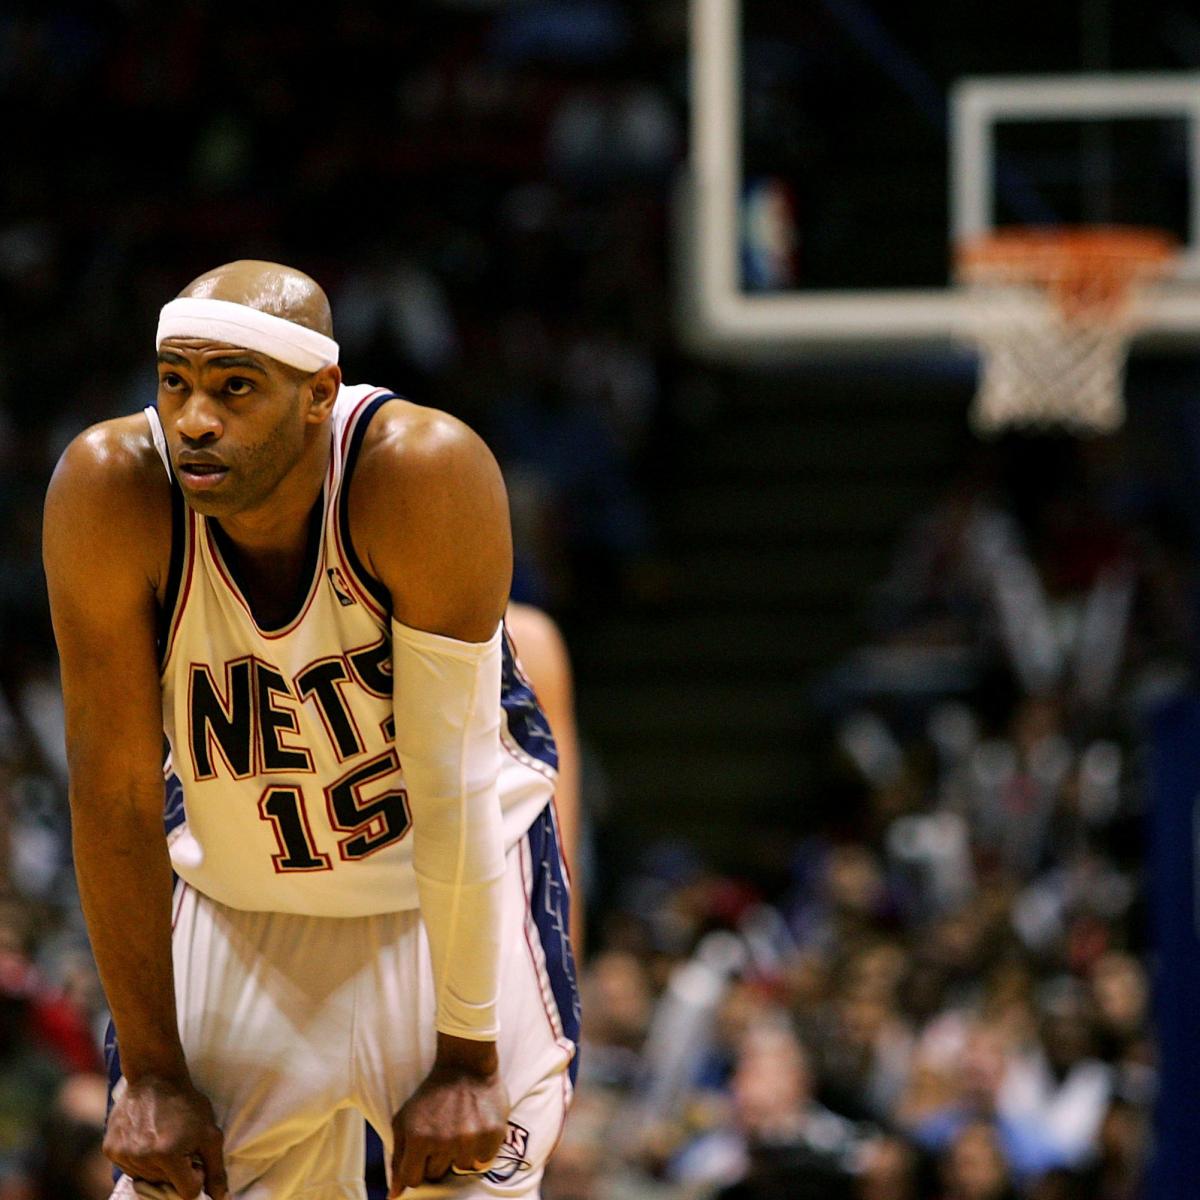 Vince Carter back in town to face NJ Nets 